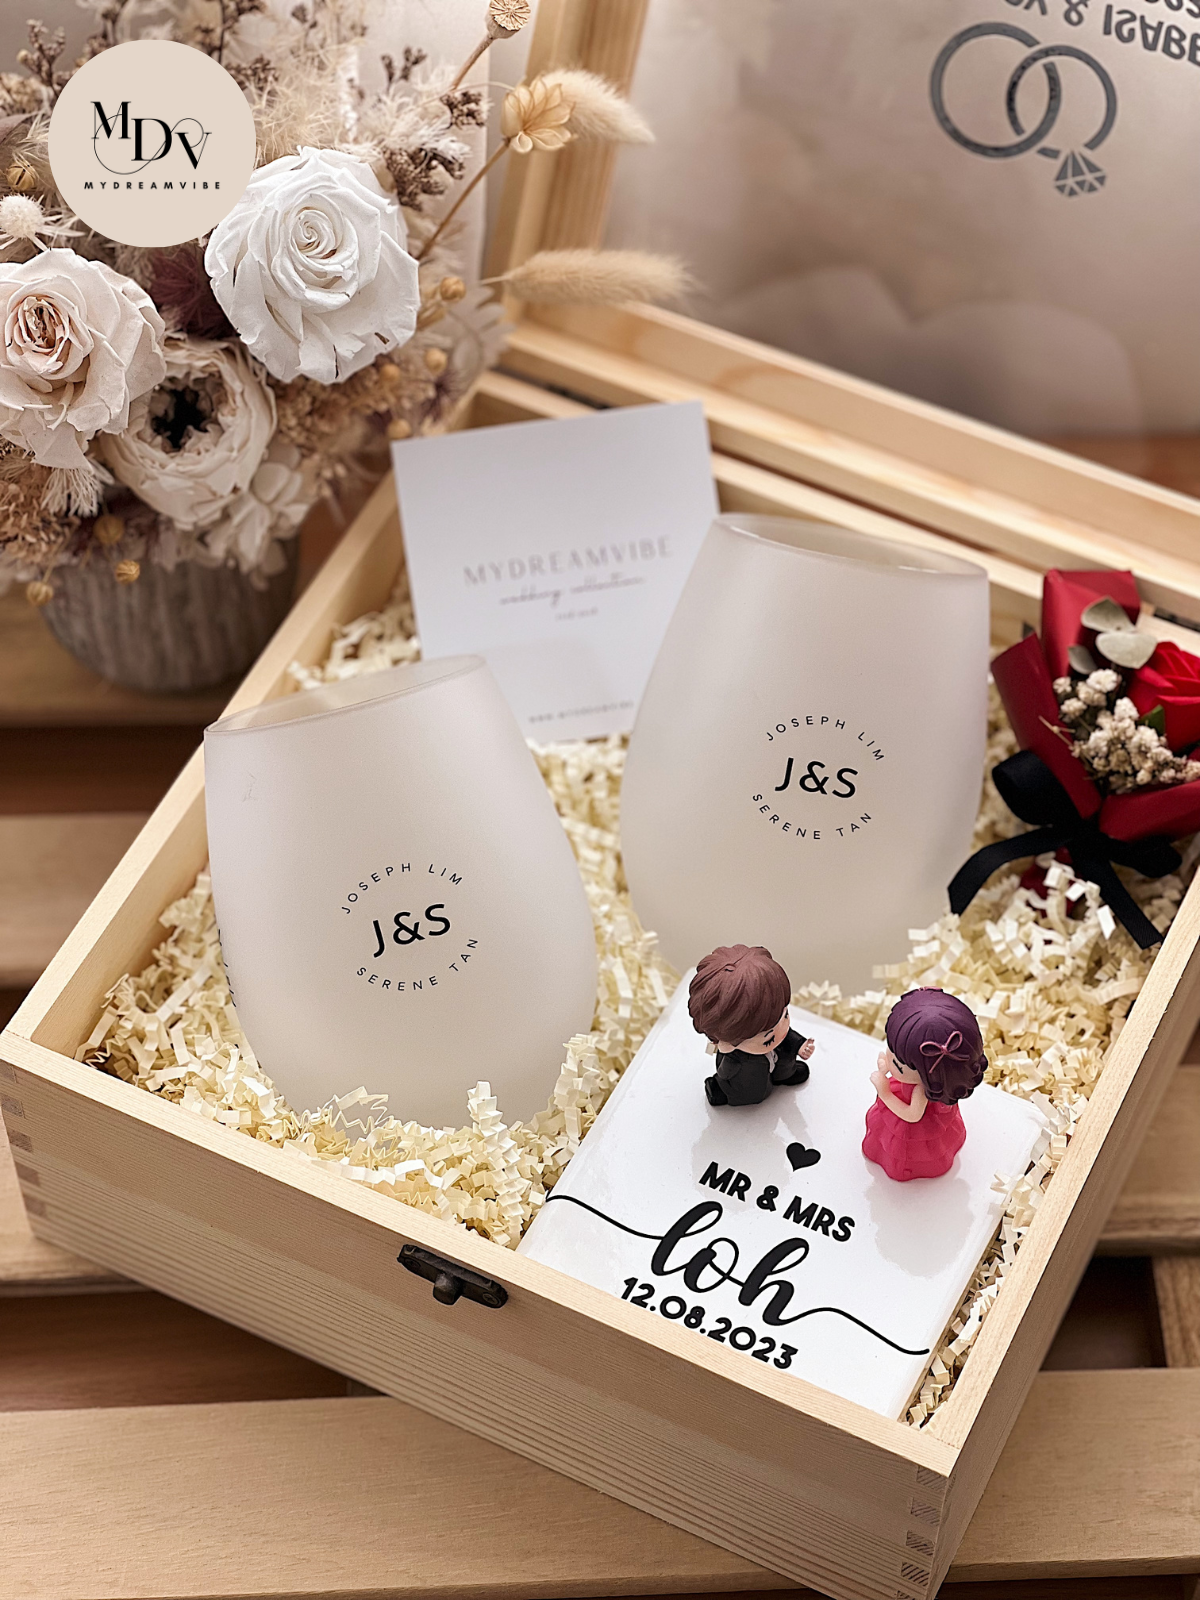 Top Unique Wedding Gift Ideas in Singapore for Couples: Perfect Gifts for  the Bride and Groom, by Photojaanic